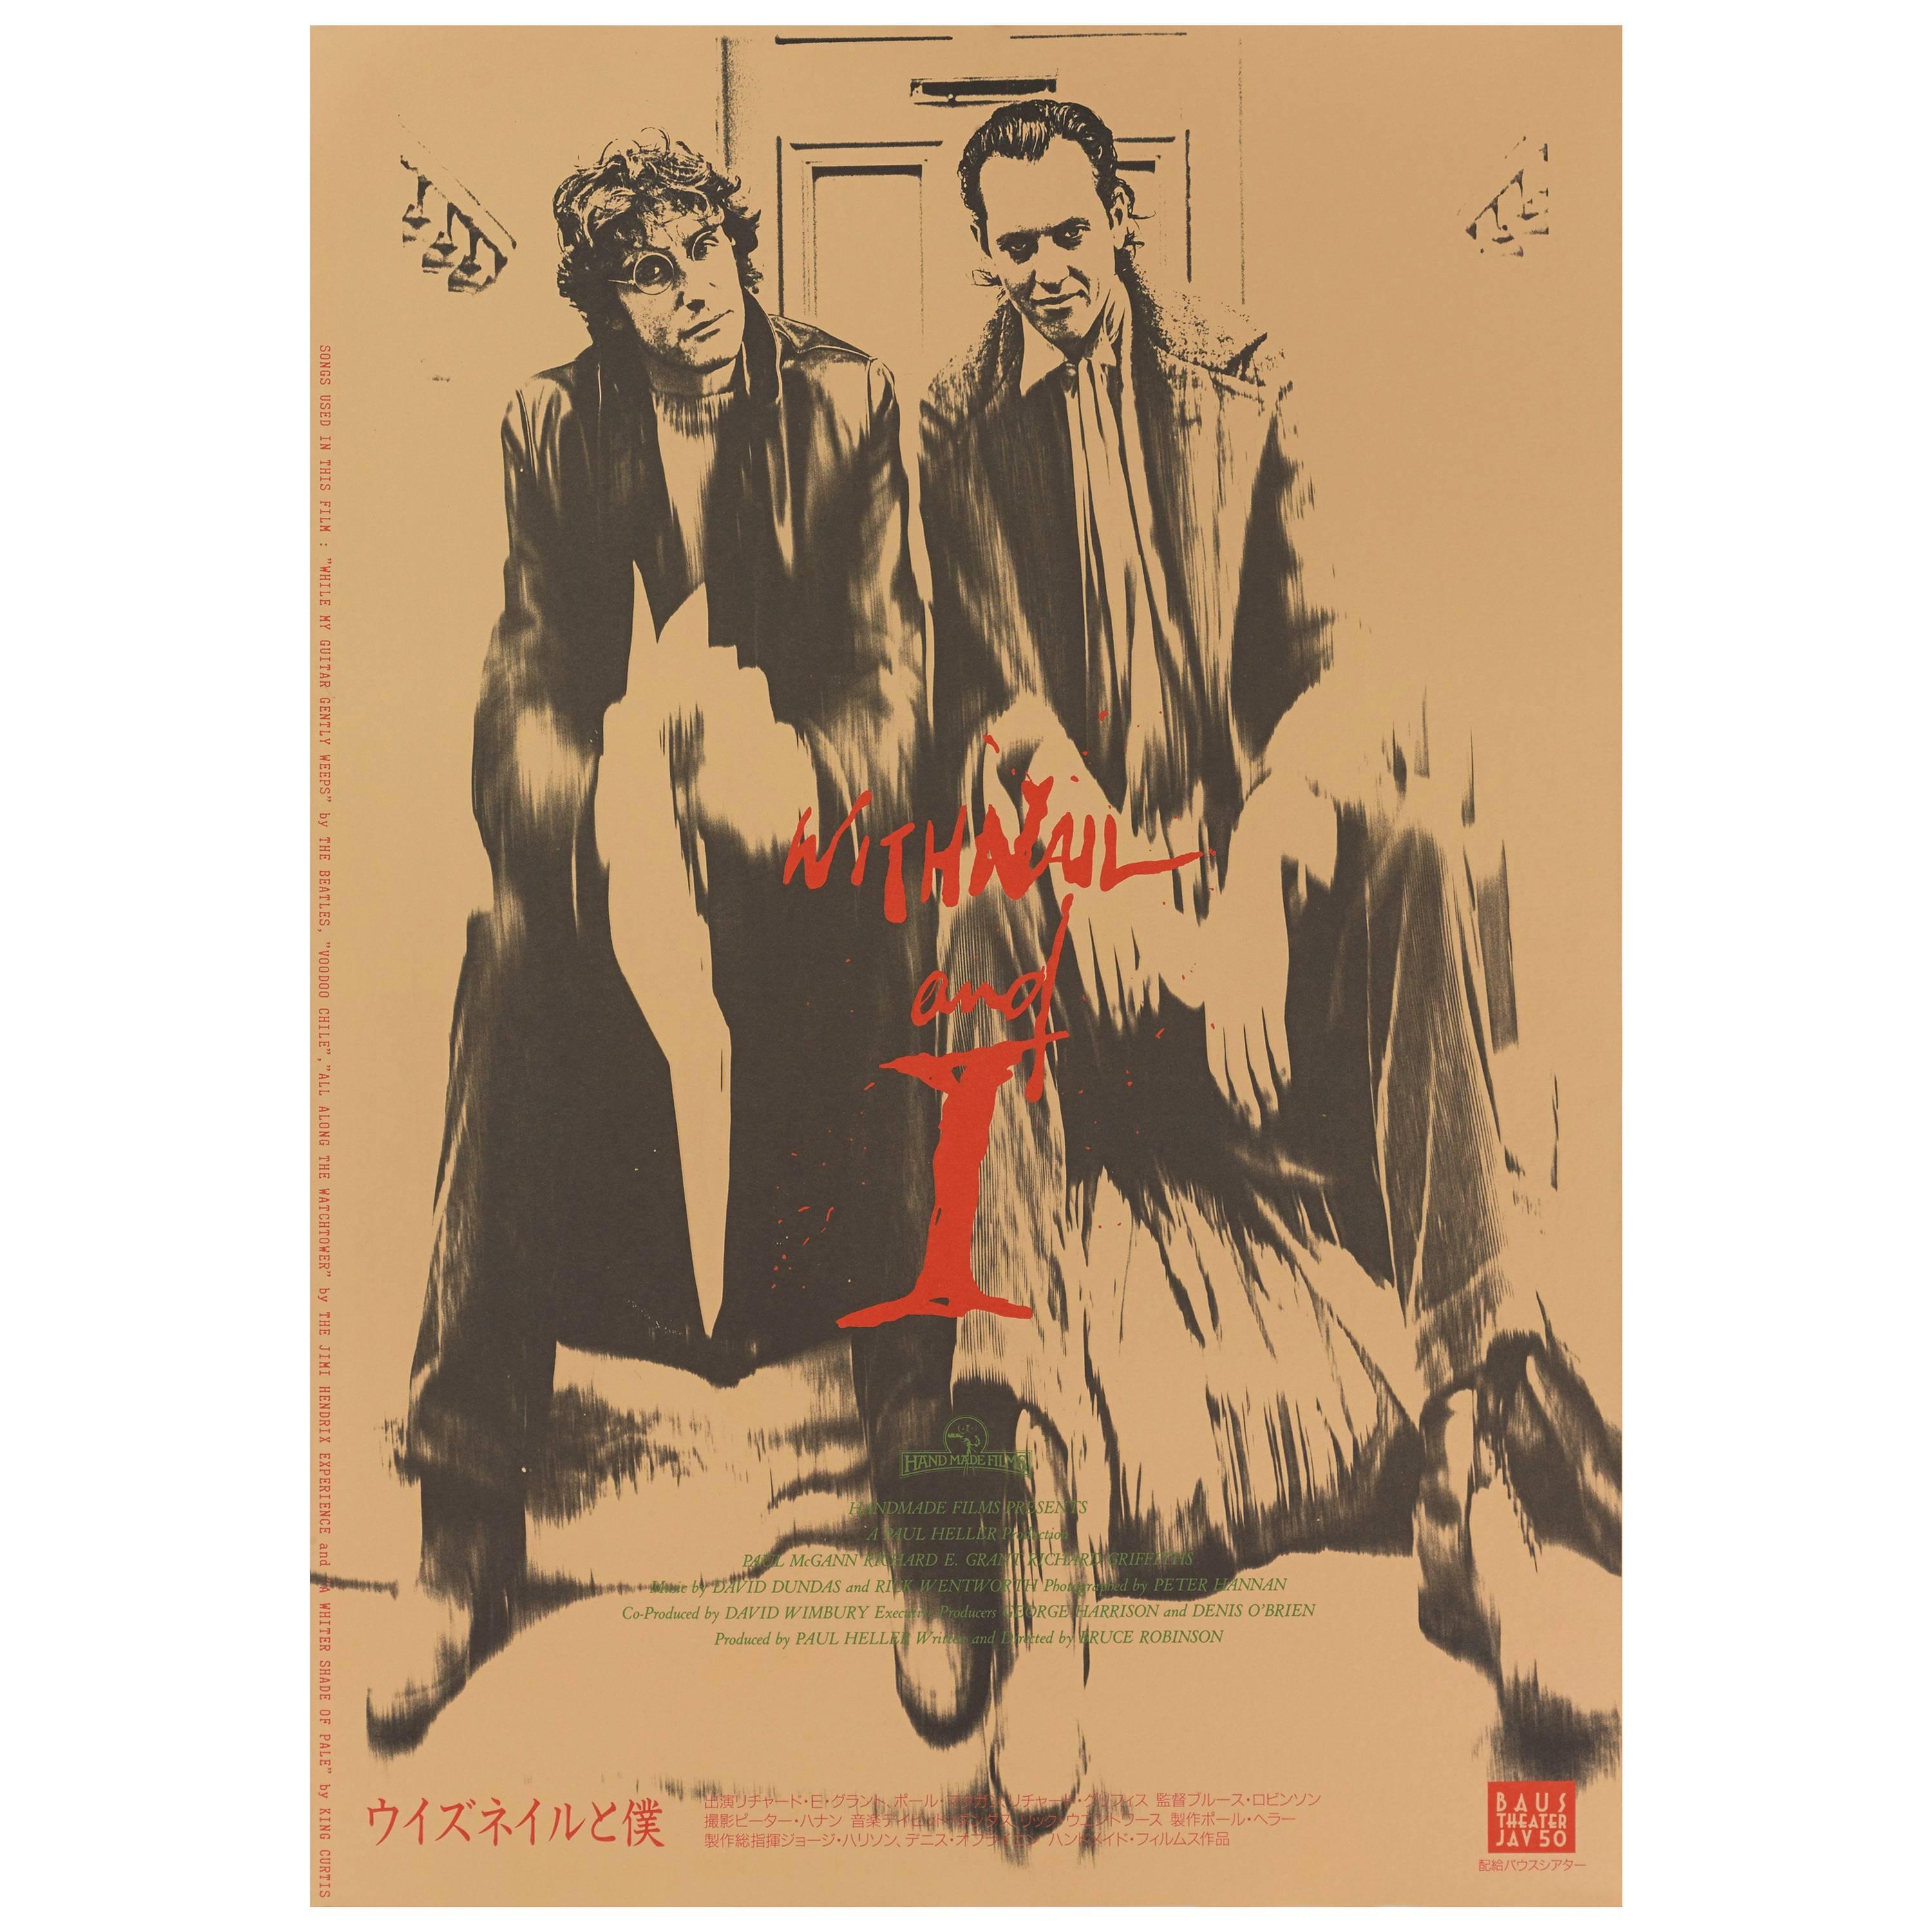 "Withnail and I" Original Japanese Movie Poster